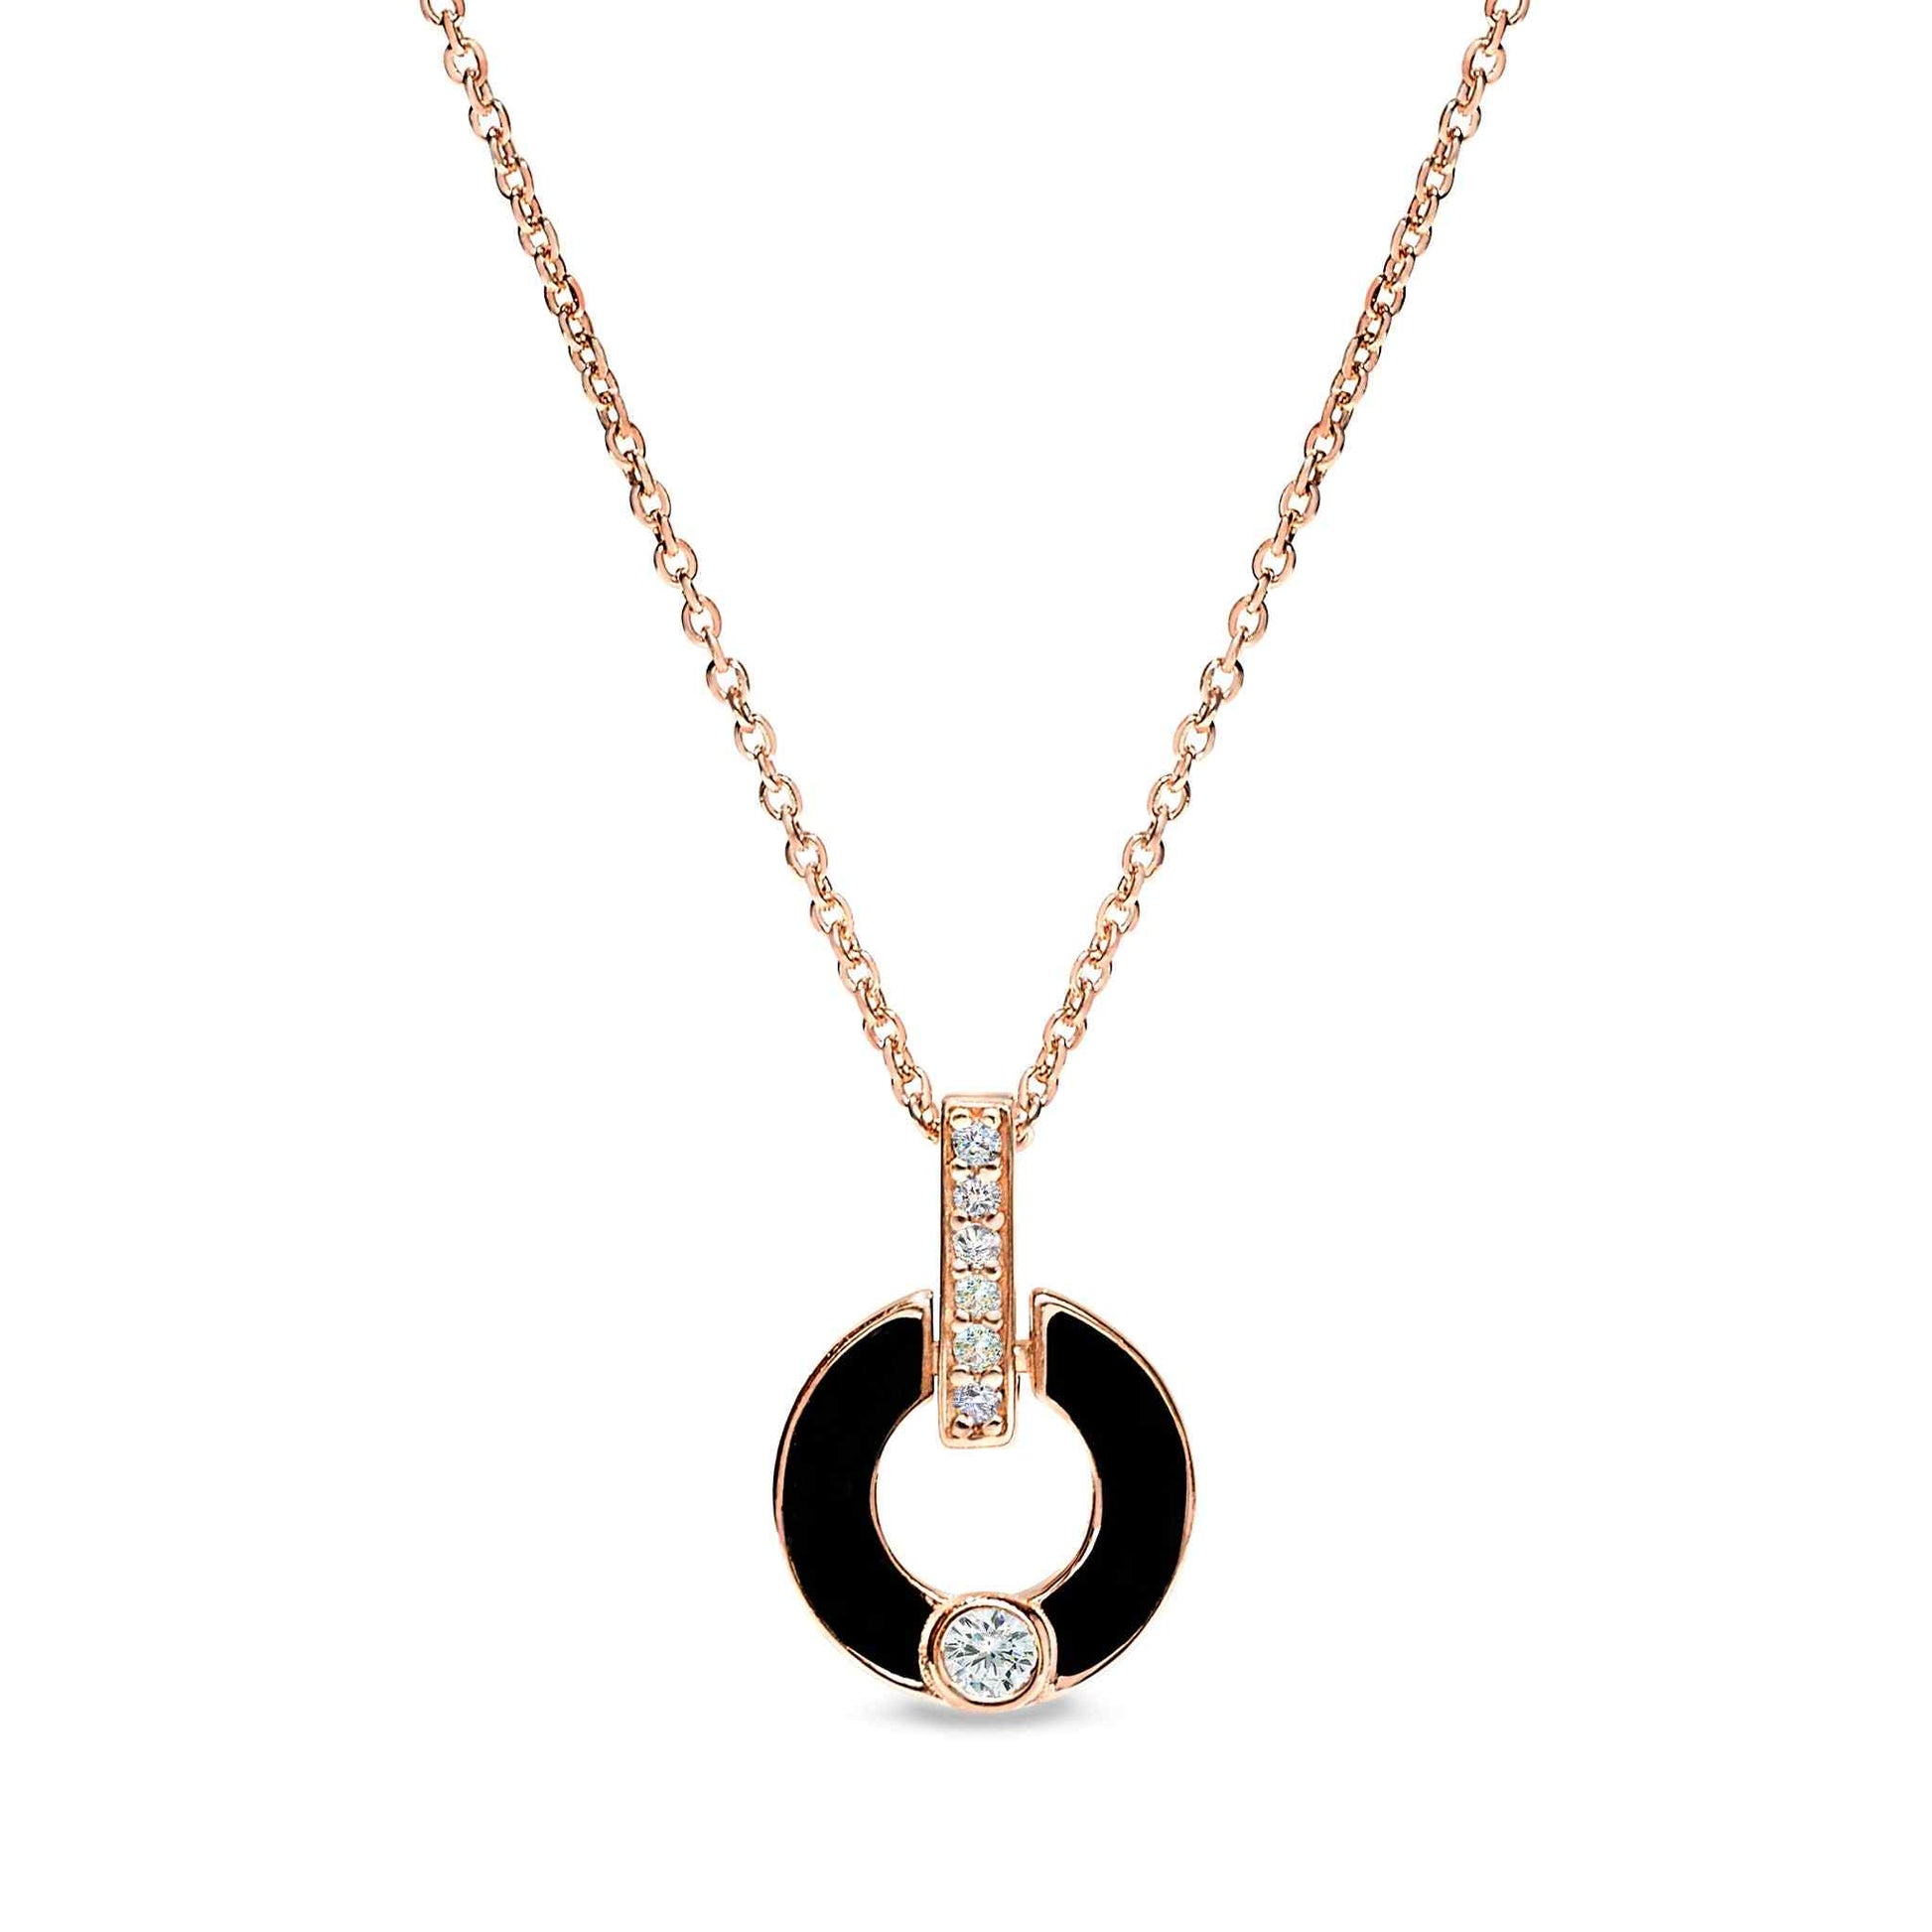 A sterling silver round drop necklace with black enamel and simulated diamonds displayed on a neutral white background.